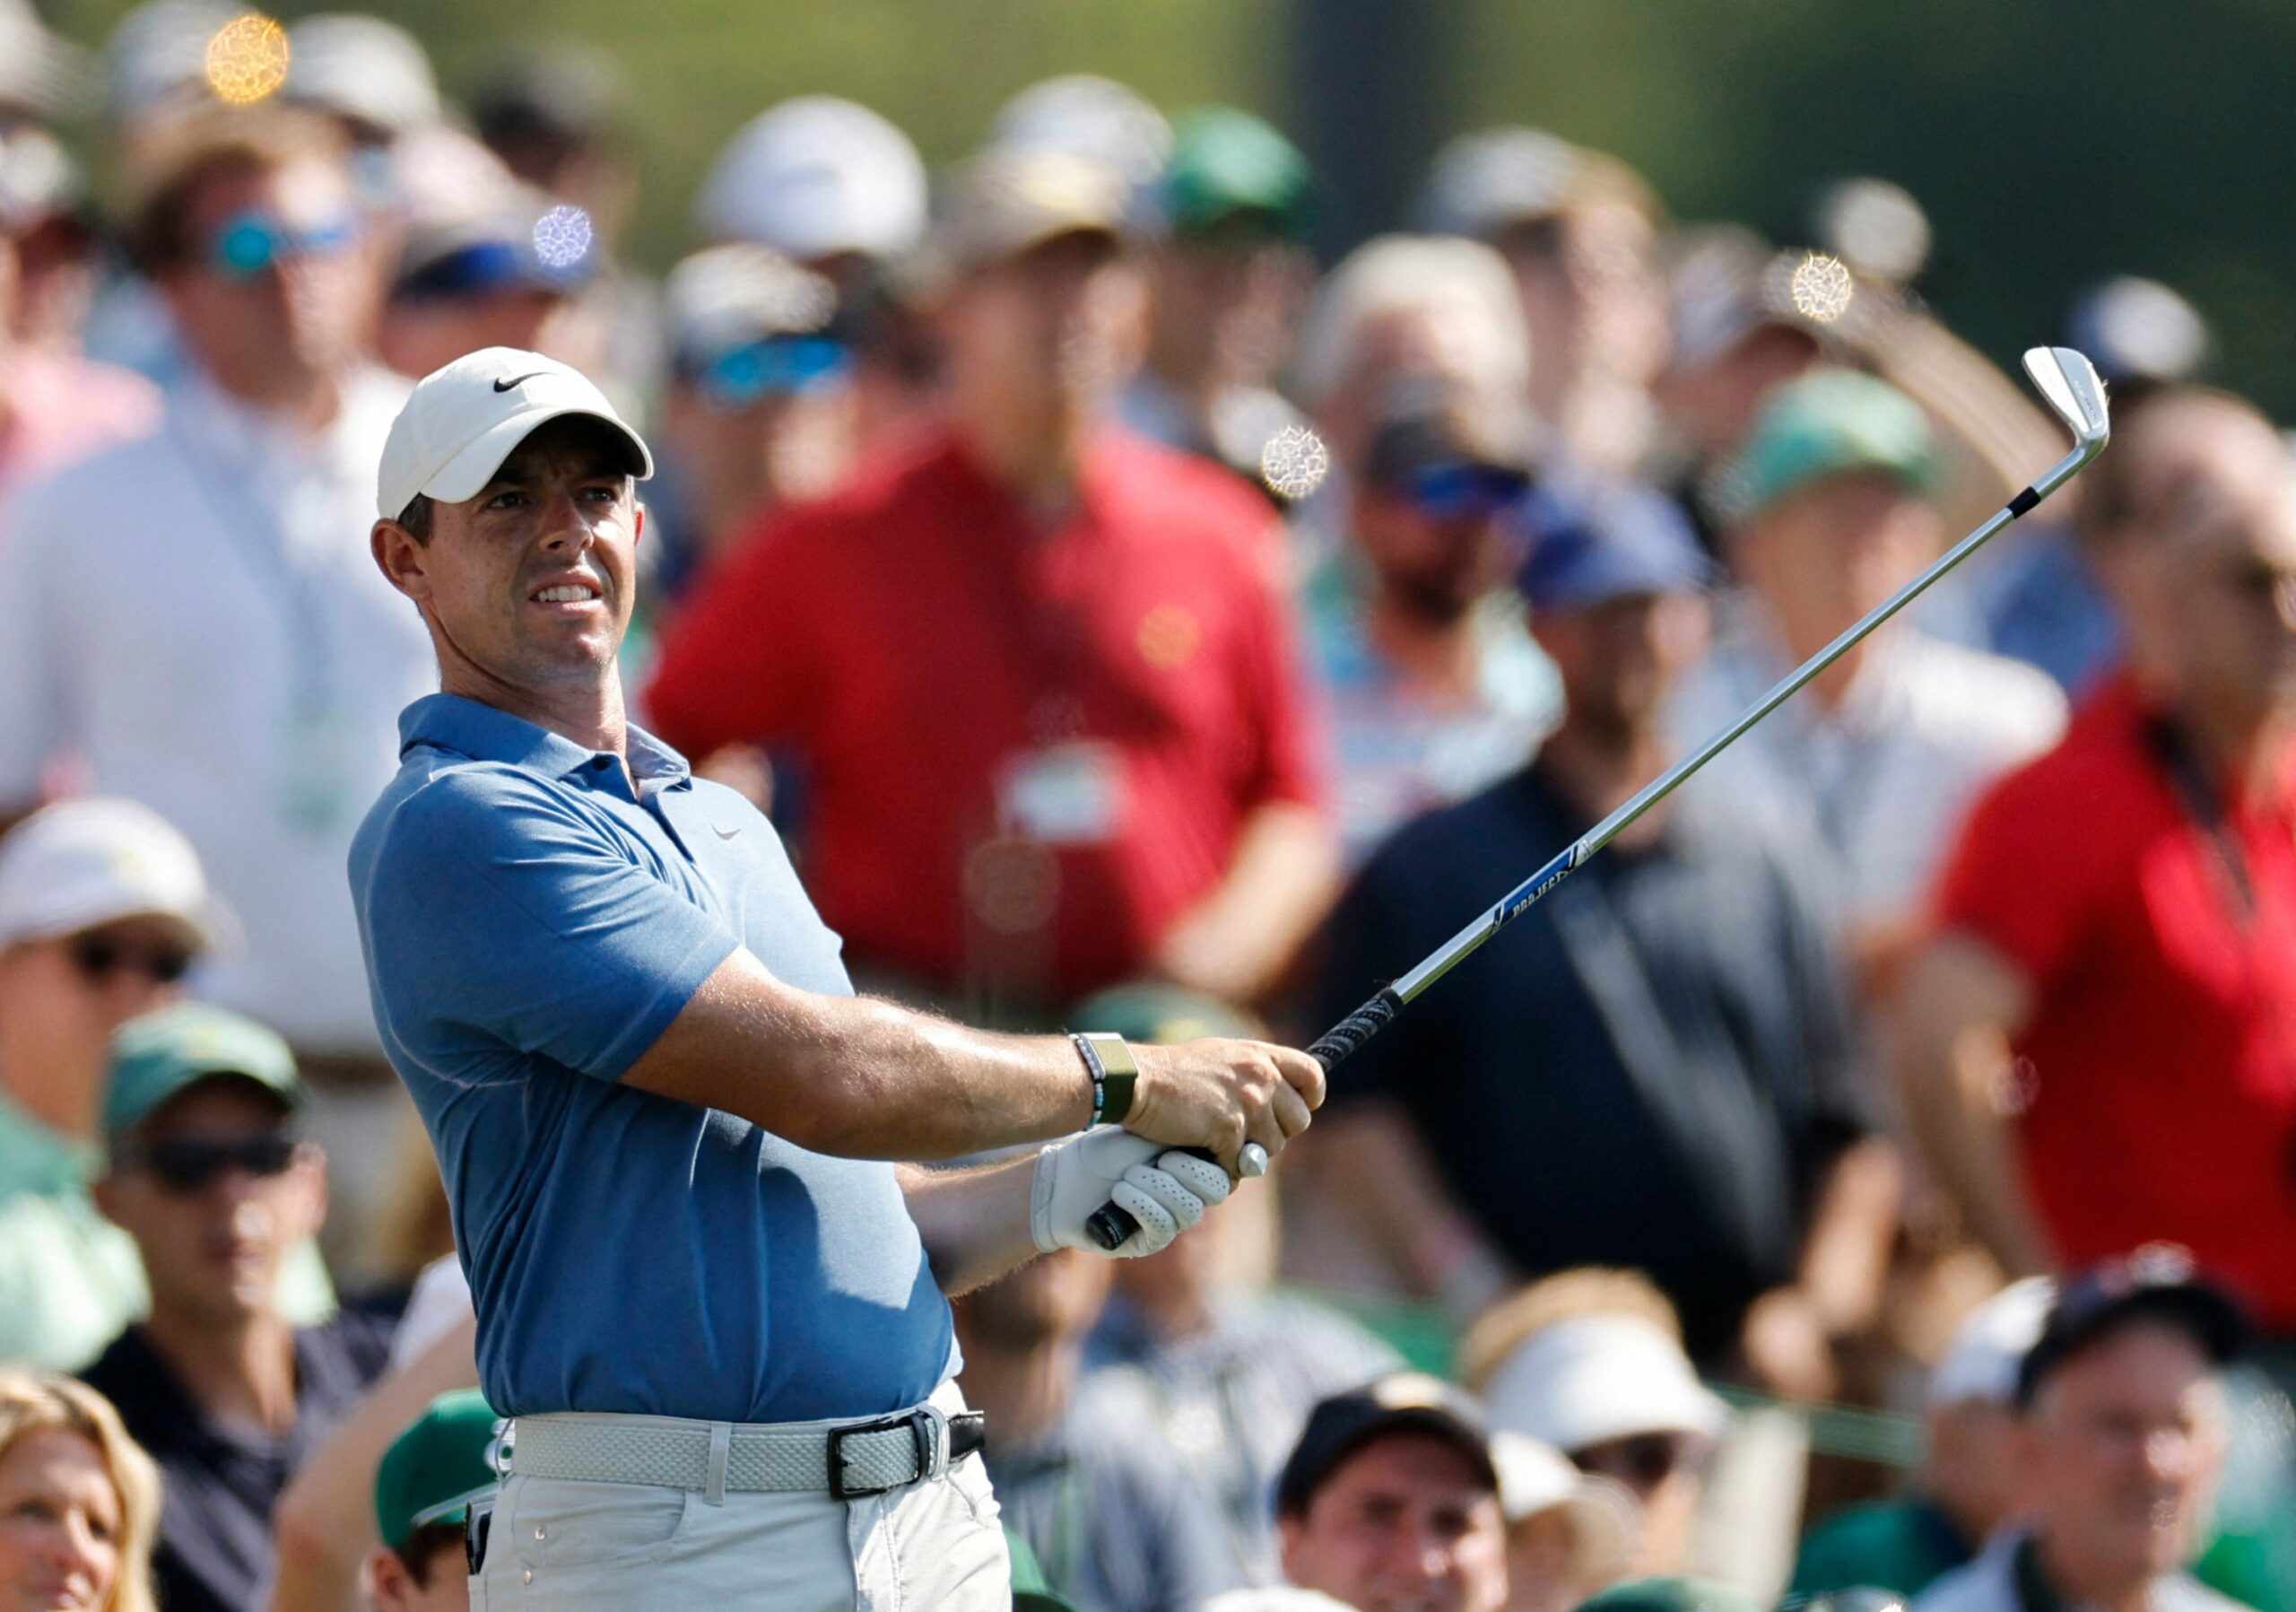 Your Guide To Watching The Masters Today: Tips And Tricks For Catching The Action Live